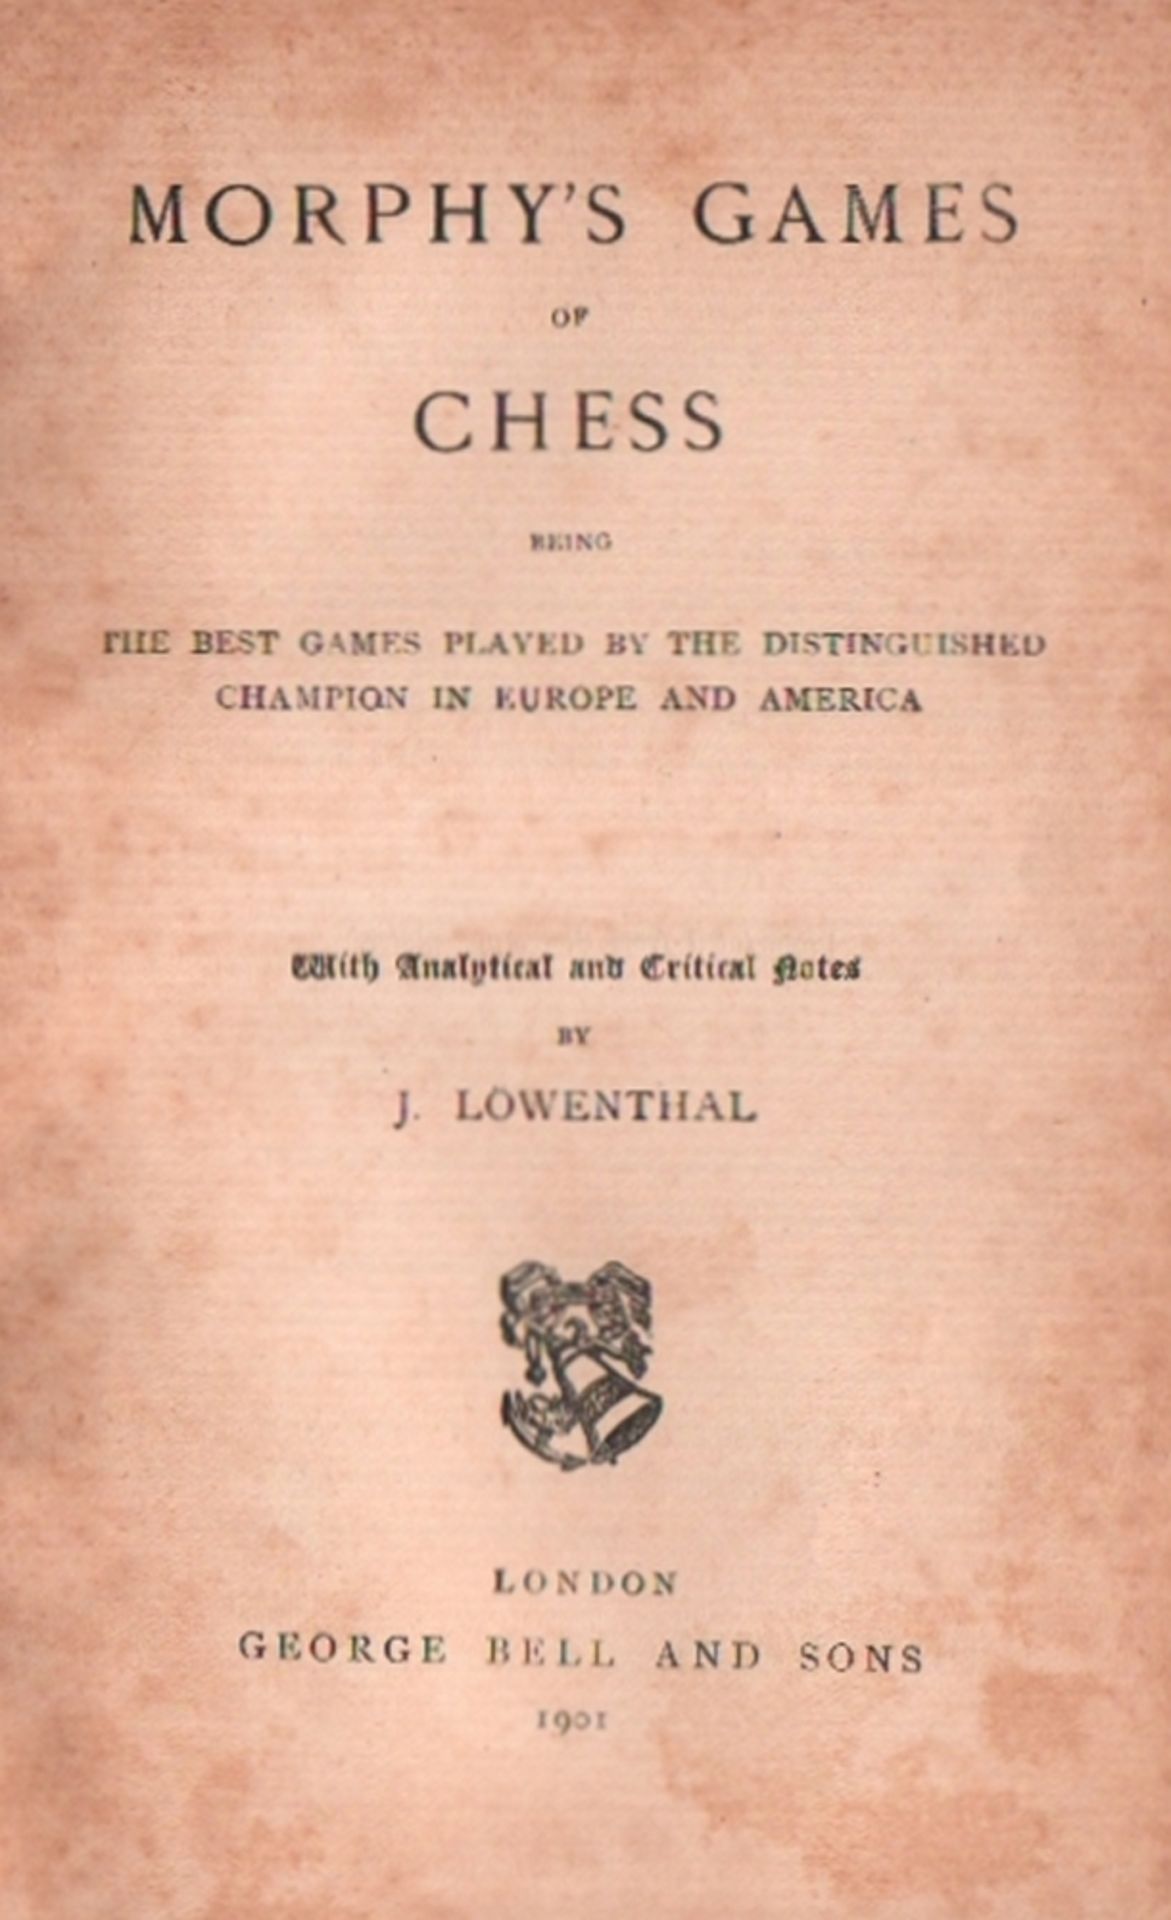 Morphy. Löwenthal, J. (Hrsg.) Morphy's games of chess being the best games played by the